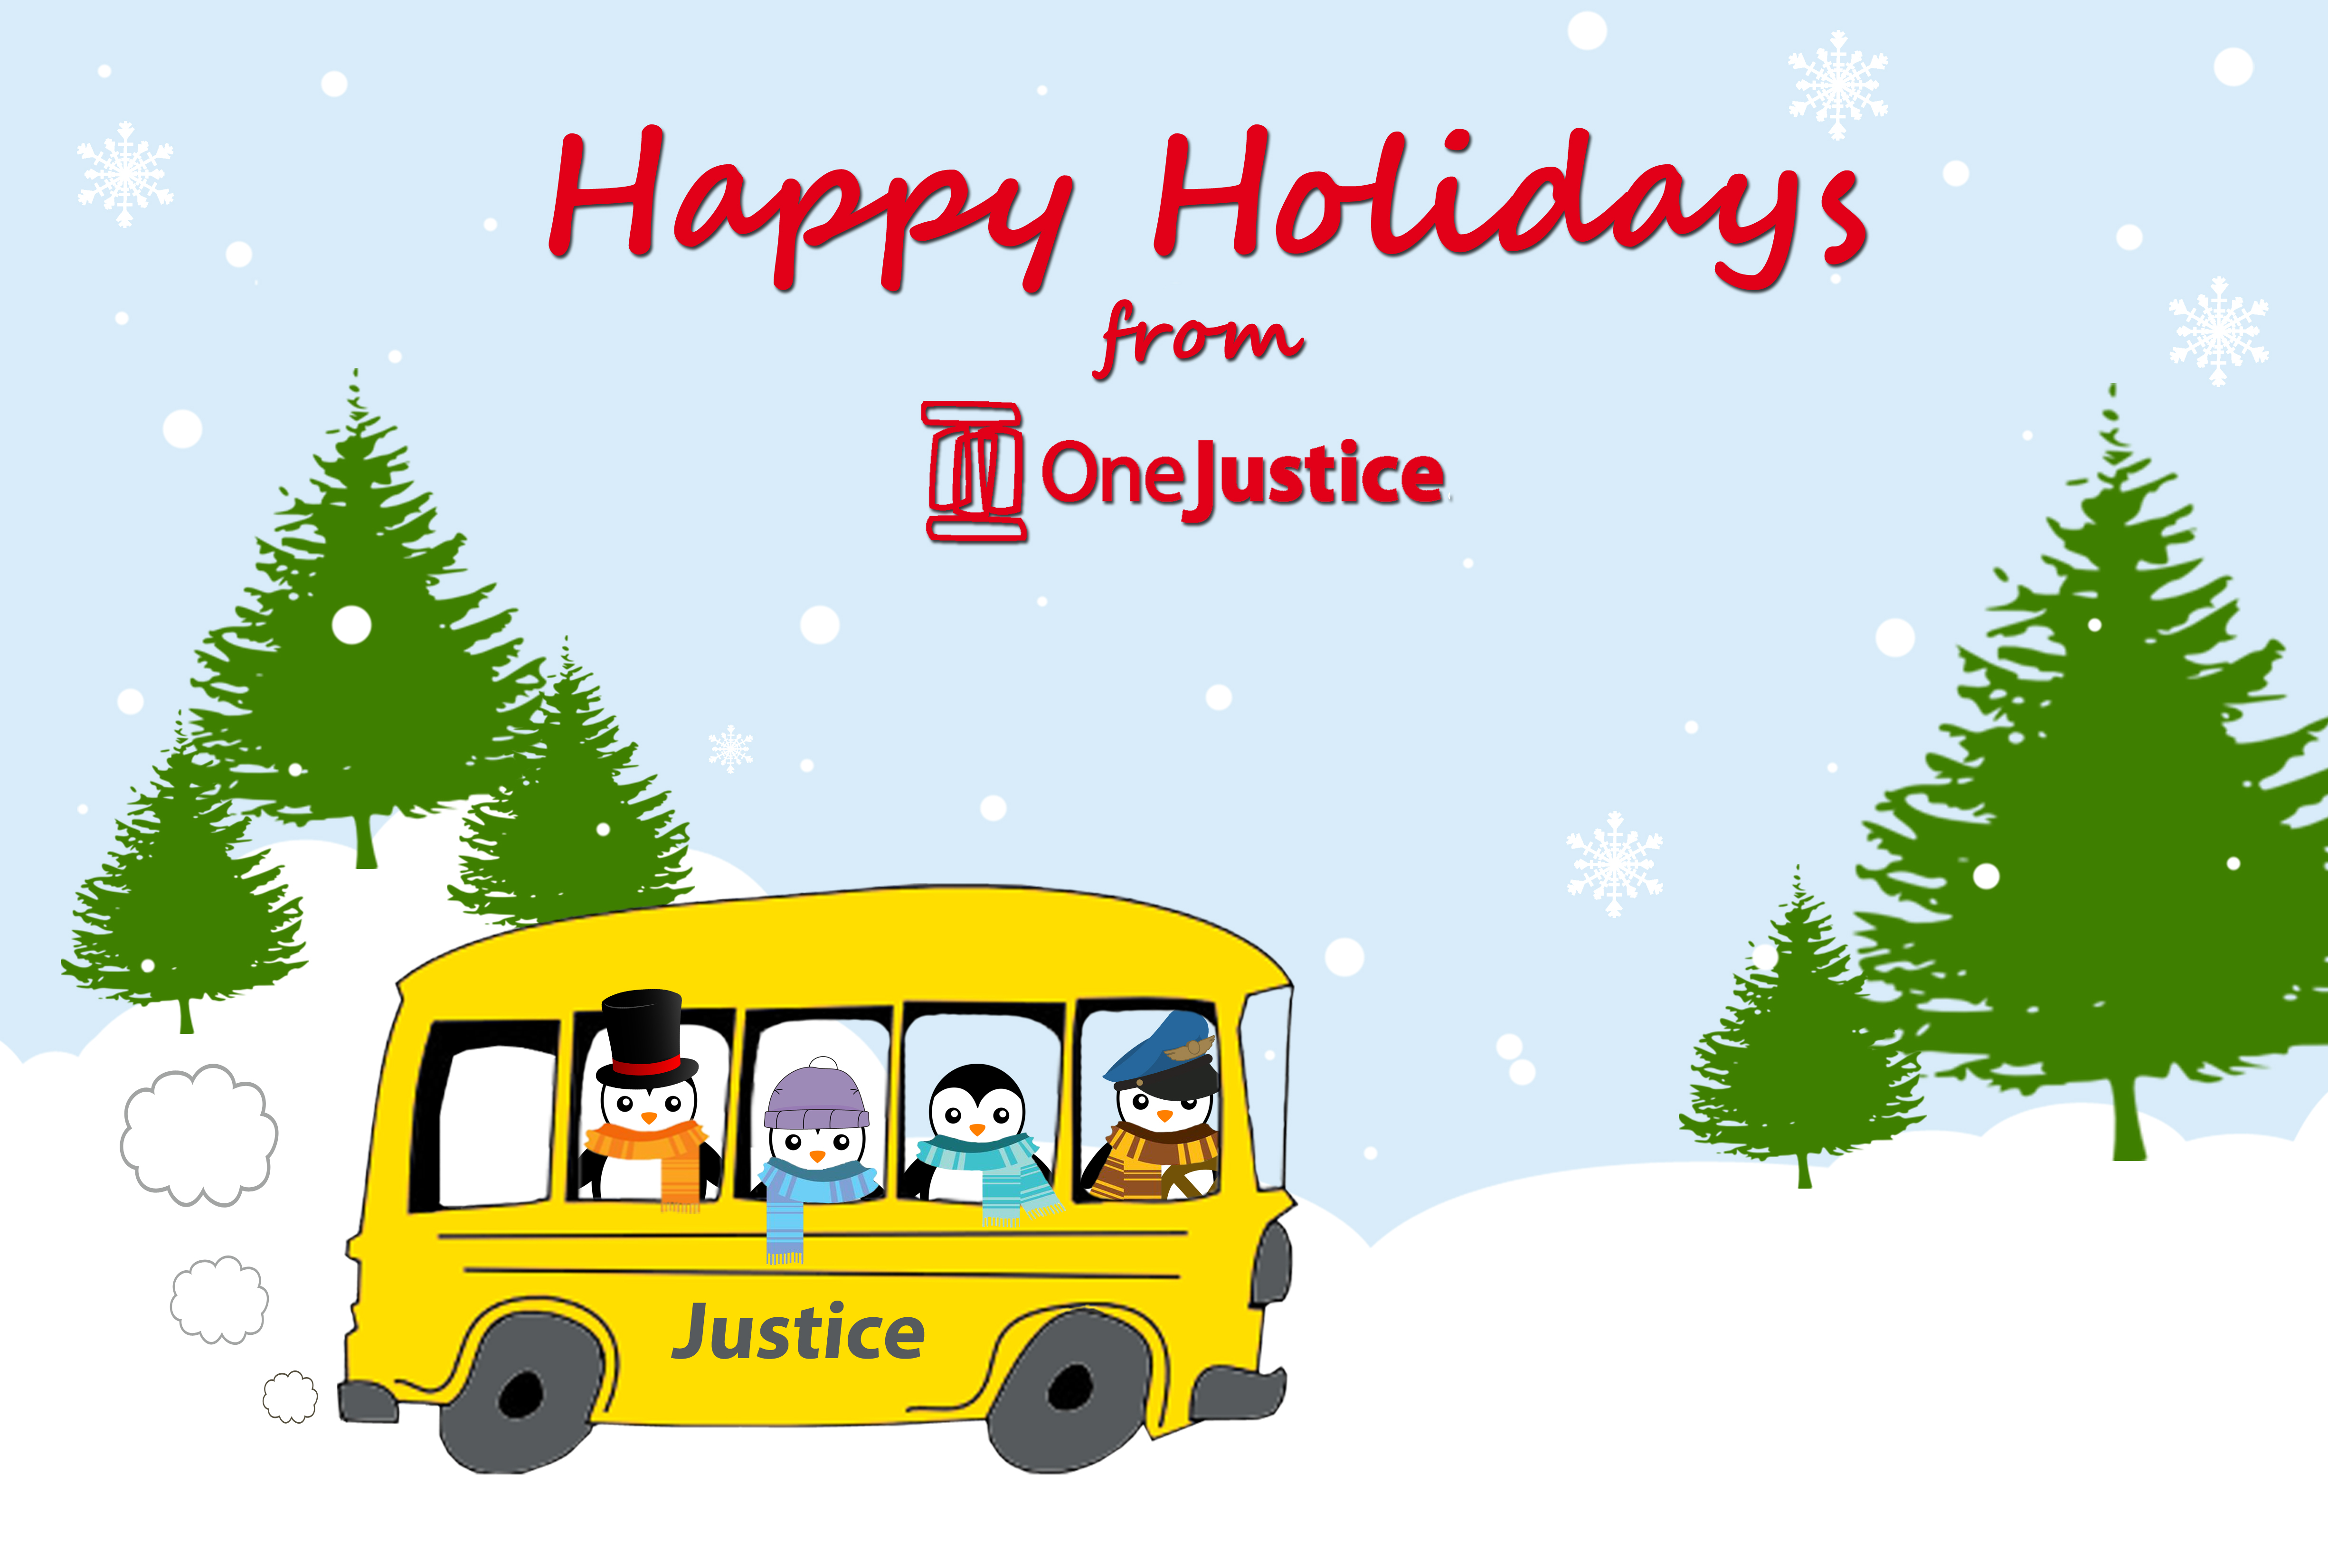 Image: Happy Holidays from OneJustice